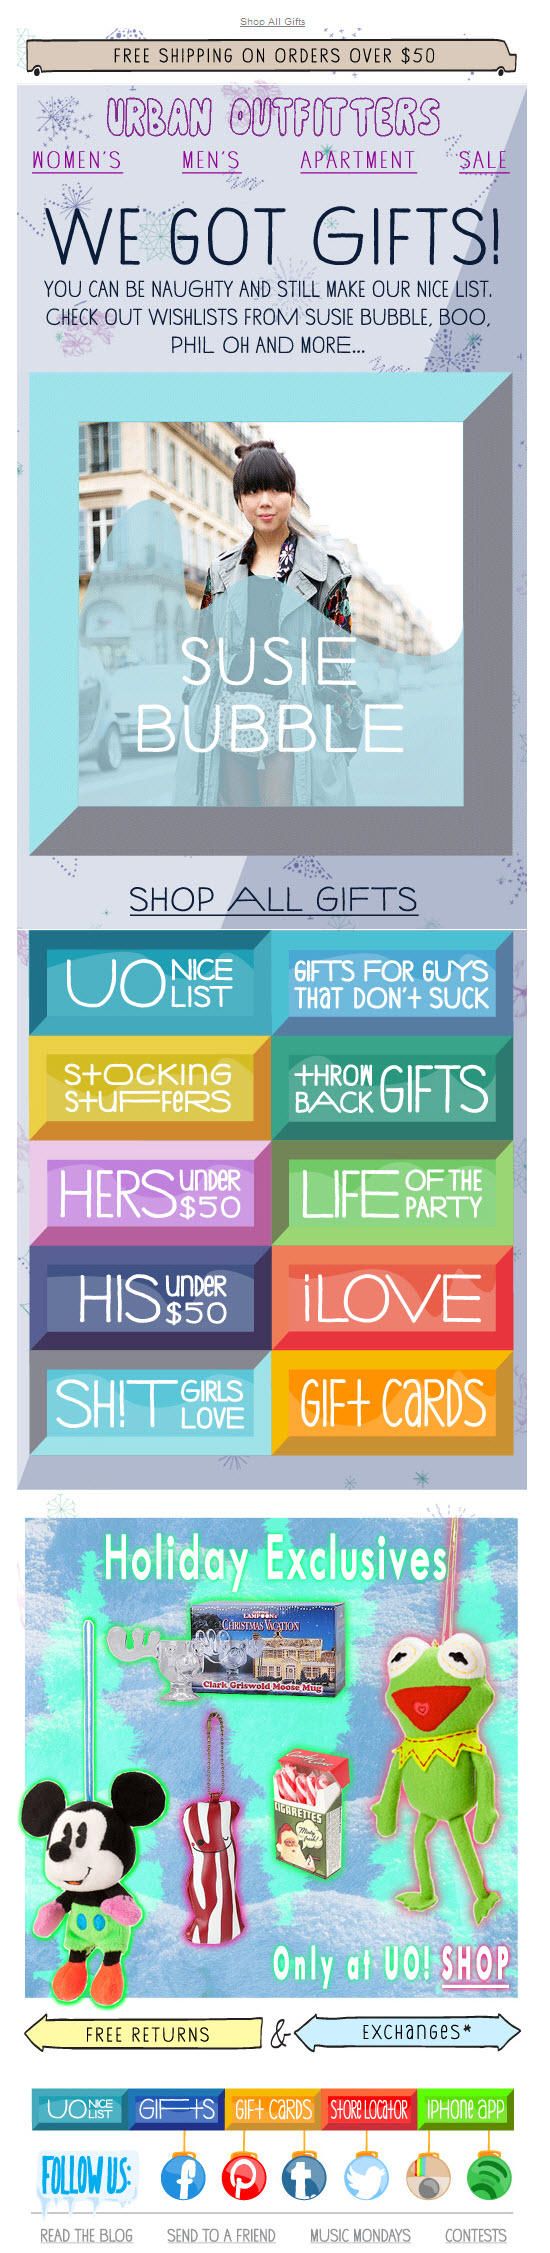 Urban Outfitters Gift Guide